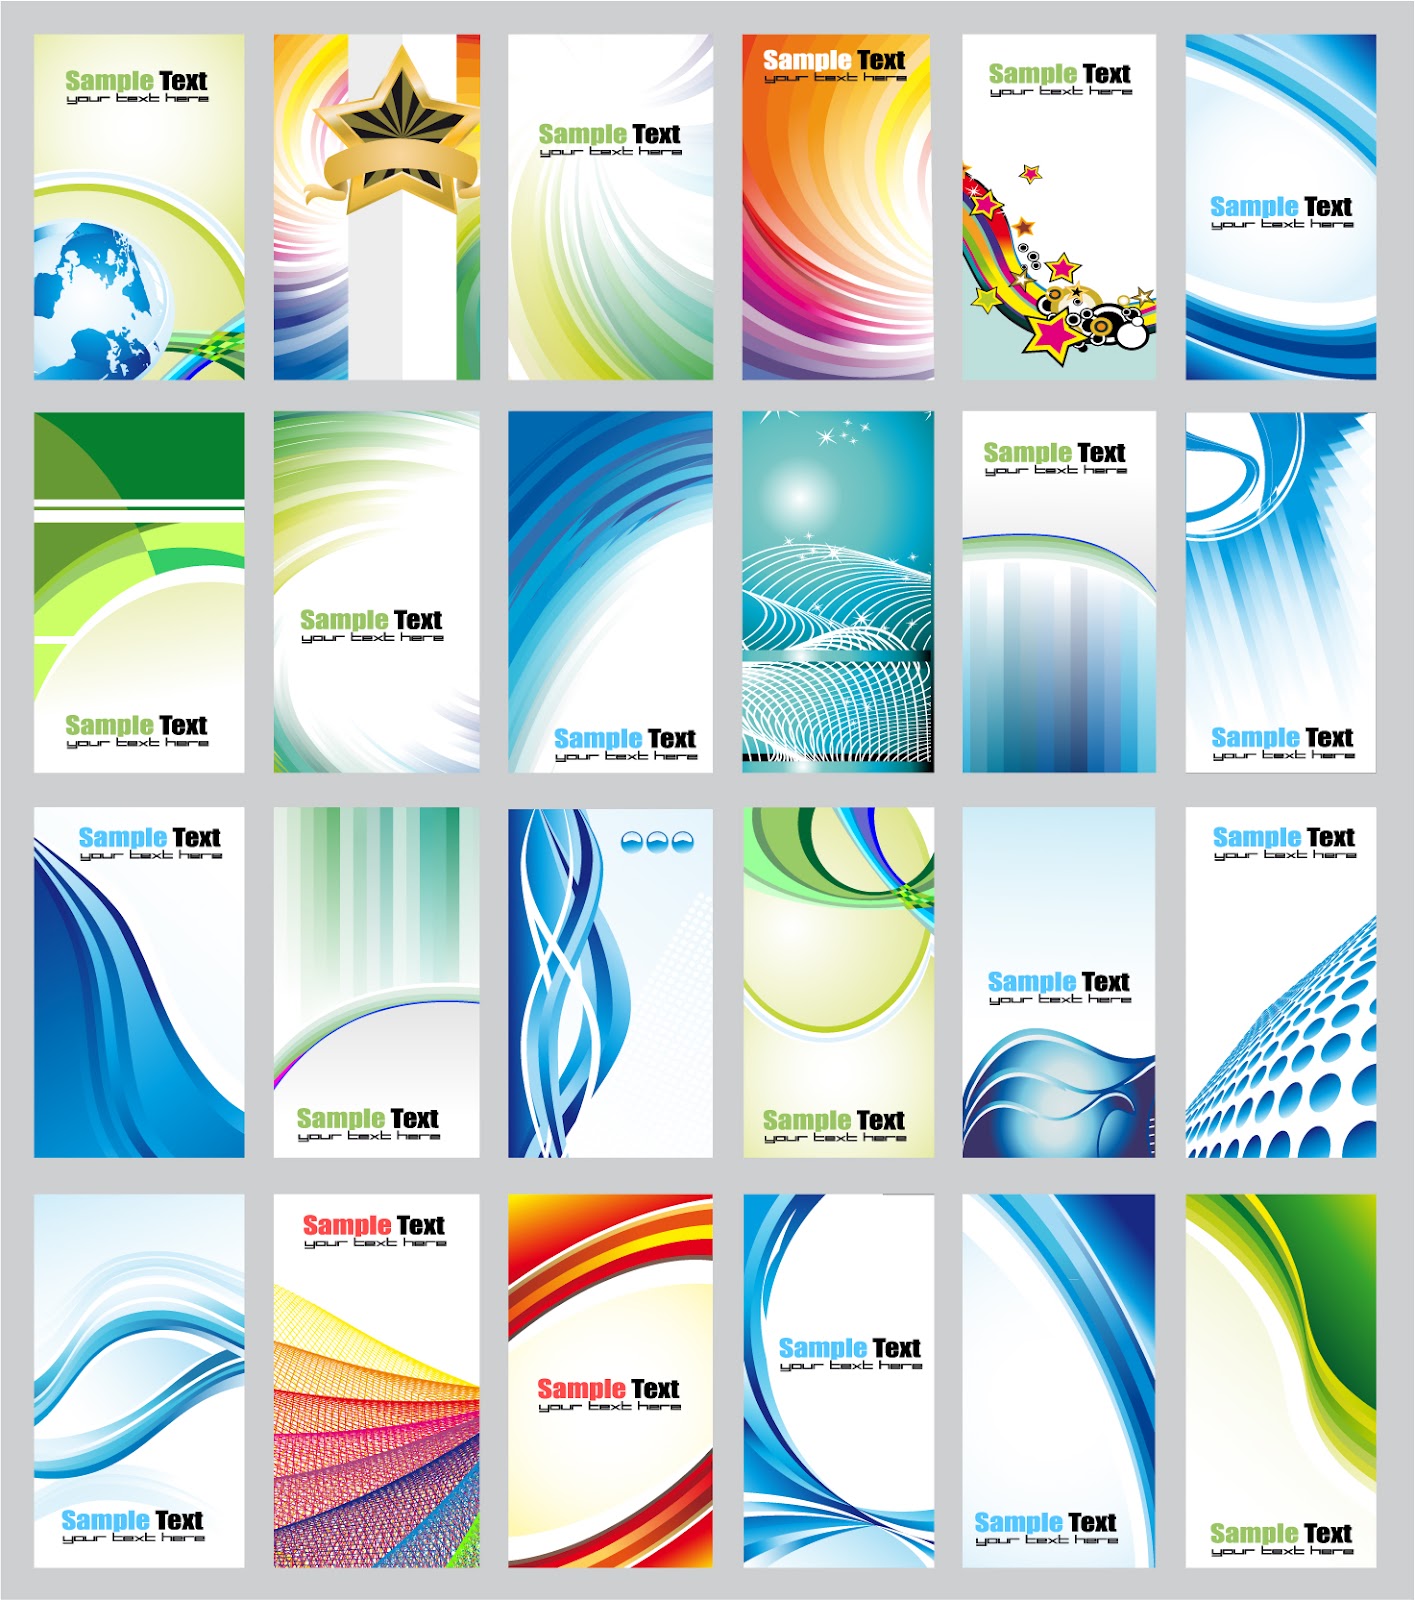 vector free download file - photo #30